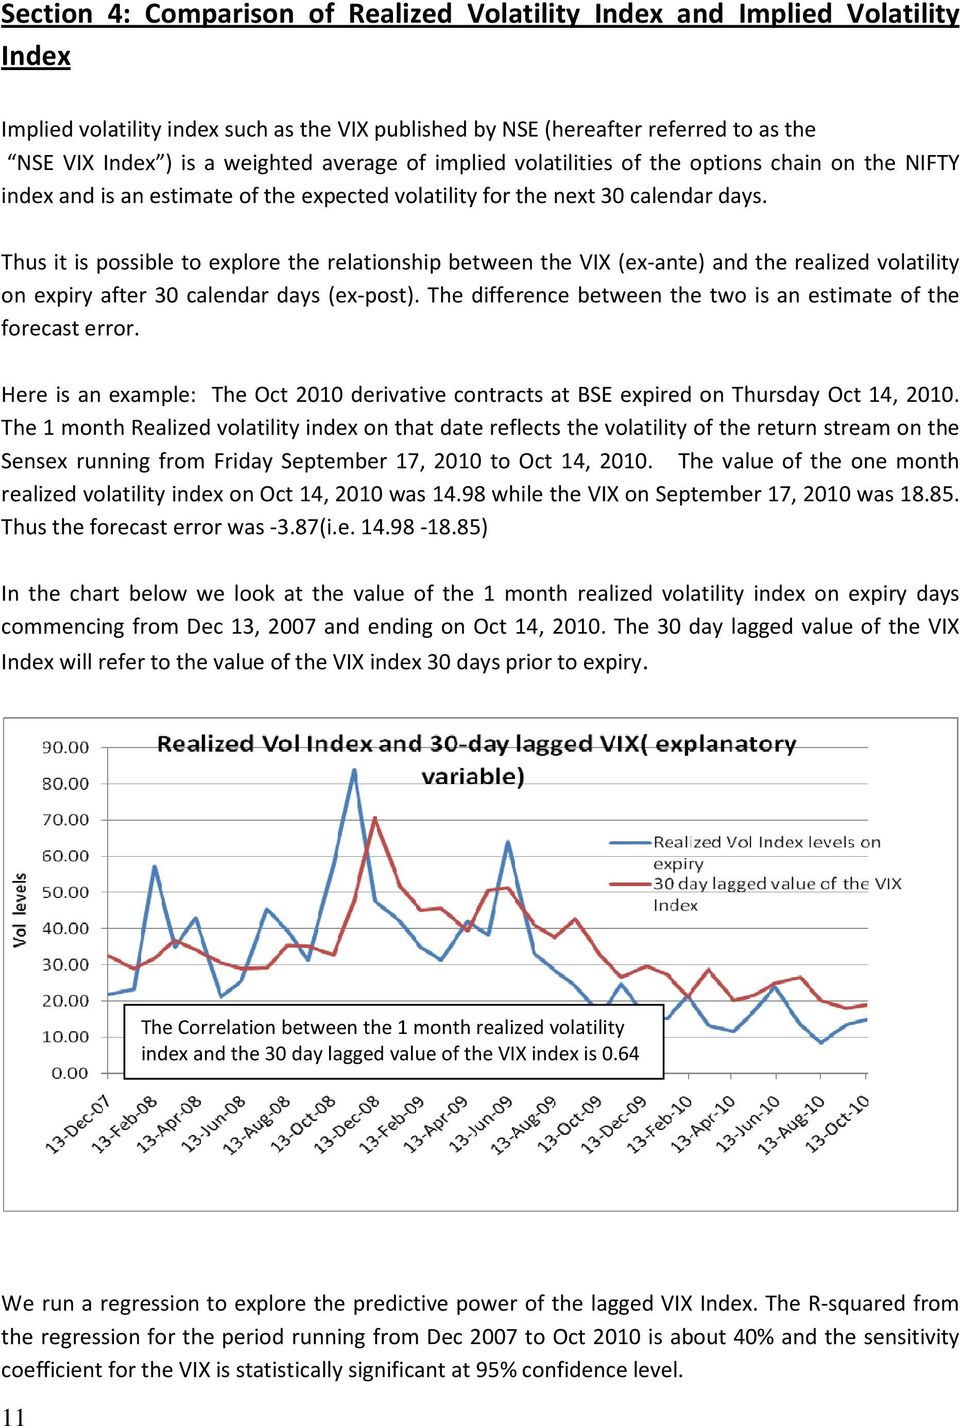 Thus it is possible to explore the relationship between the VIX (exante) and the realized volatility on expiry after 30 calendar days (expost).